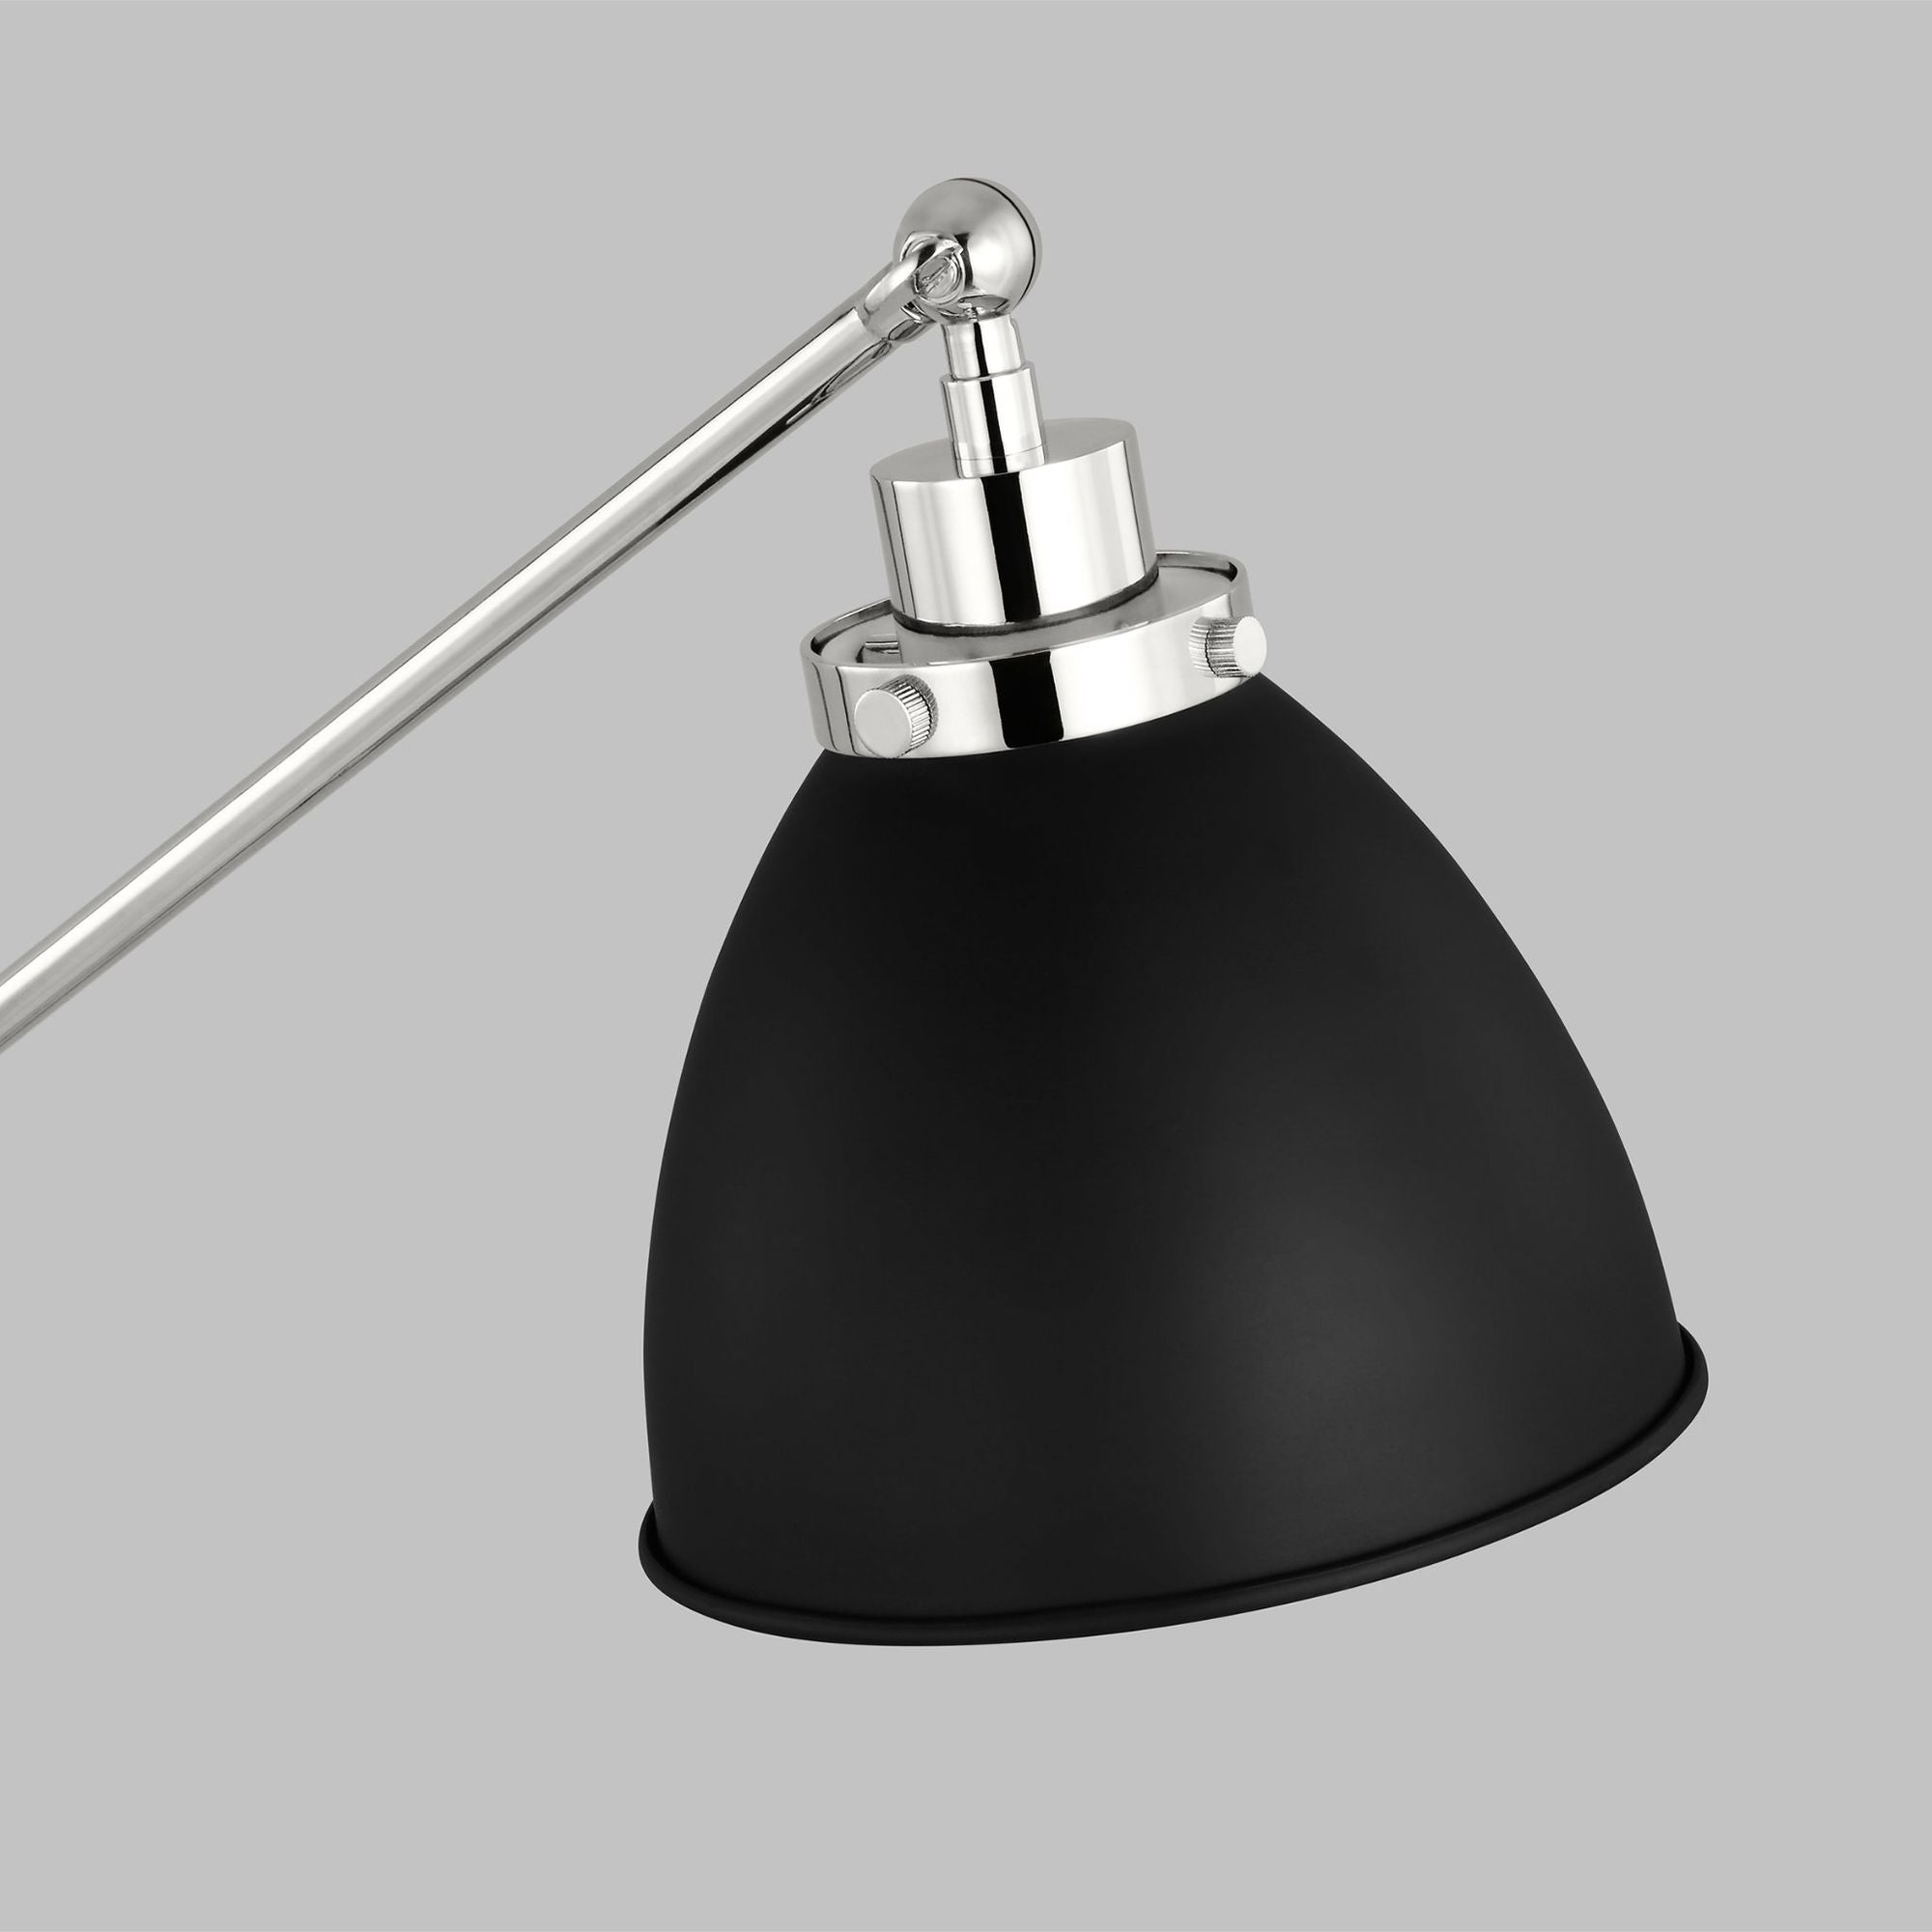 Chapman & Myers Wellfleet Dome Desk Lamp in Midnight Black and Polished Nickel